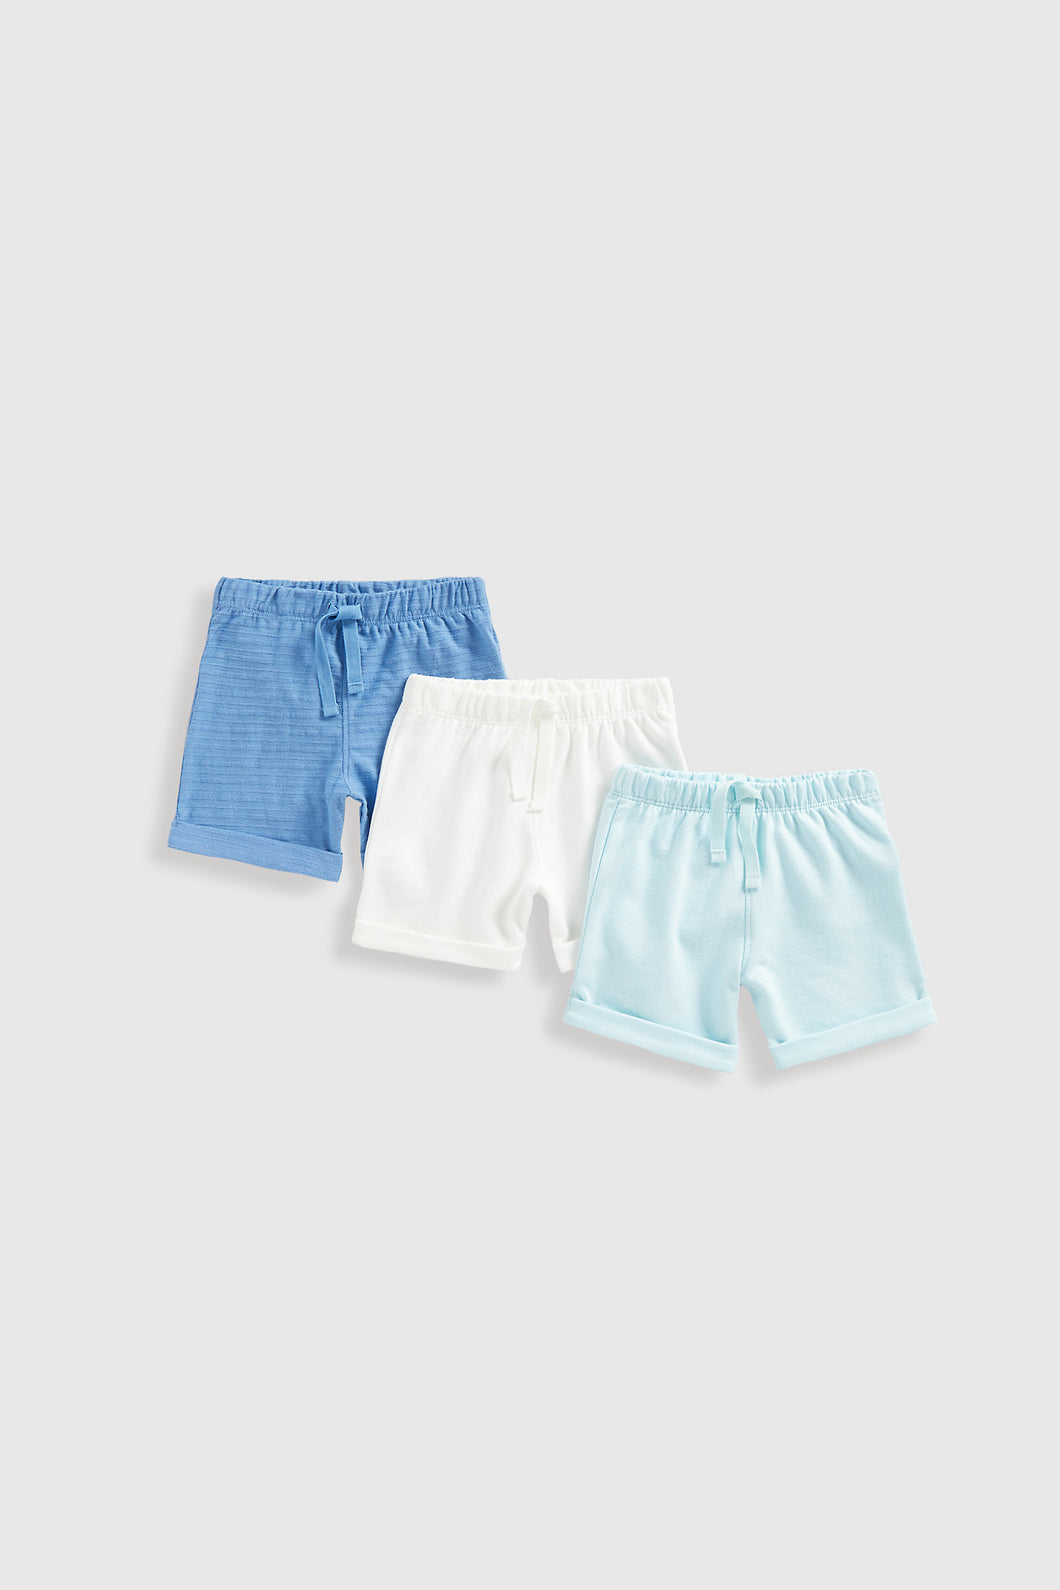 Mothercare Ocean Jersey Shorts - 3 Pack